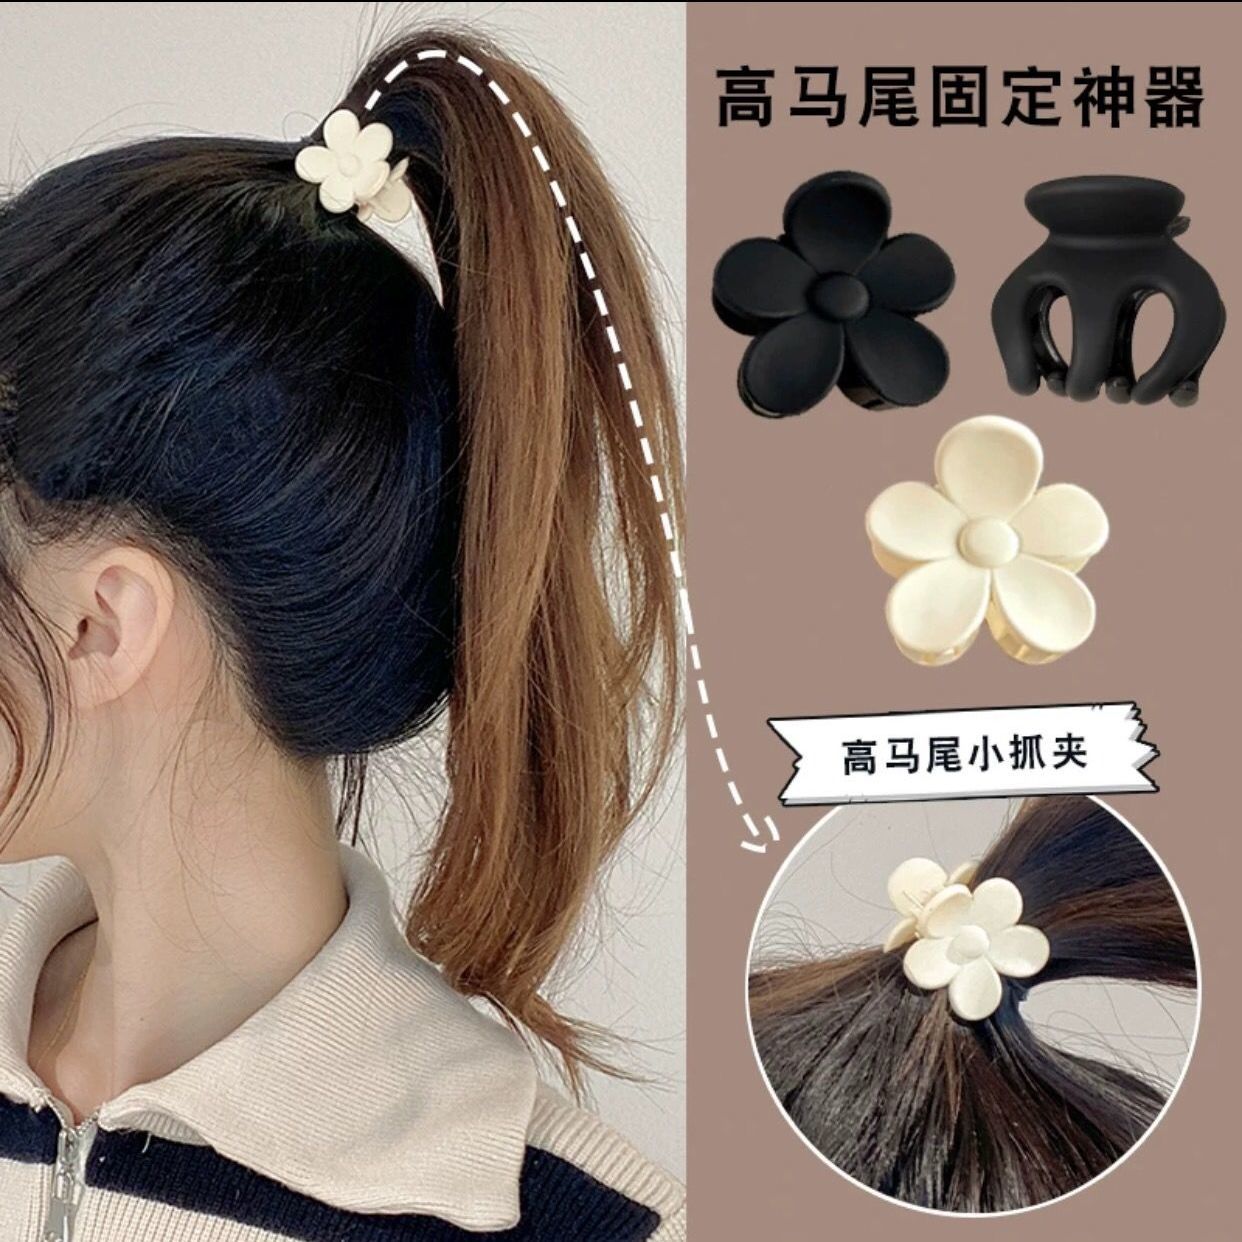 High horsetail claw clip fixed artifact anti drooping hairpin female back of head hairpin anti collapse clip headdress small grab clip